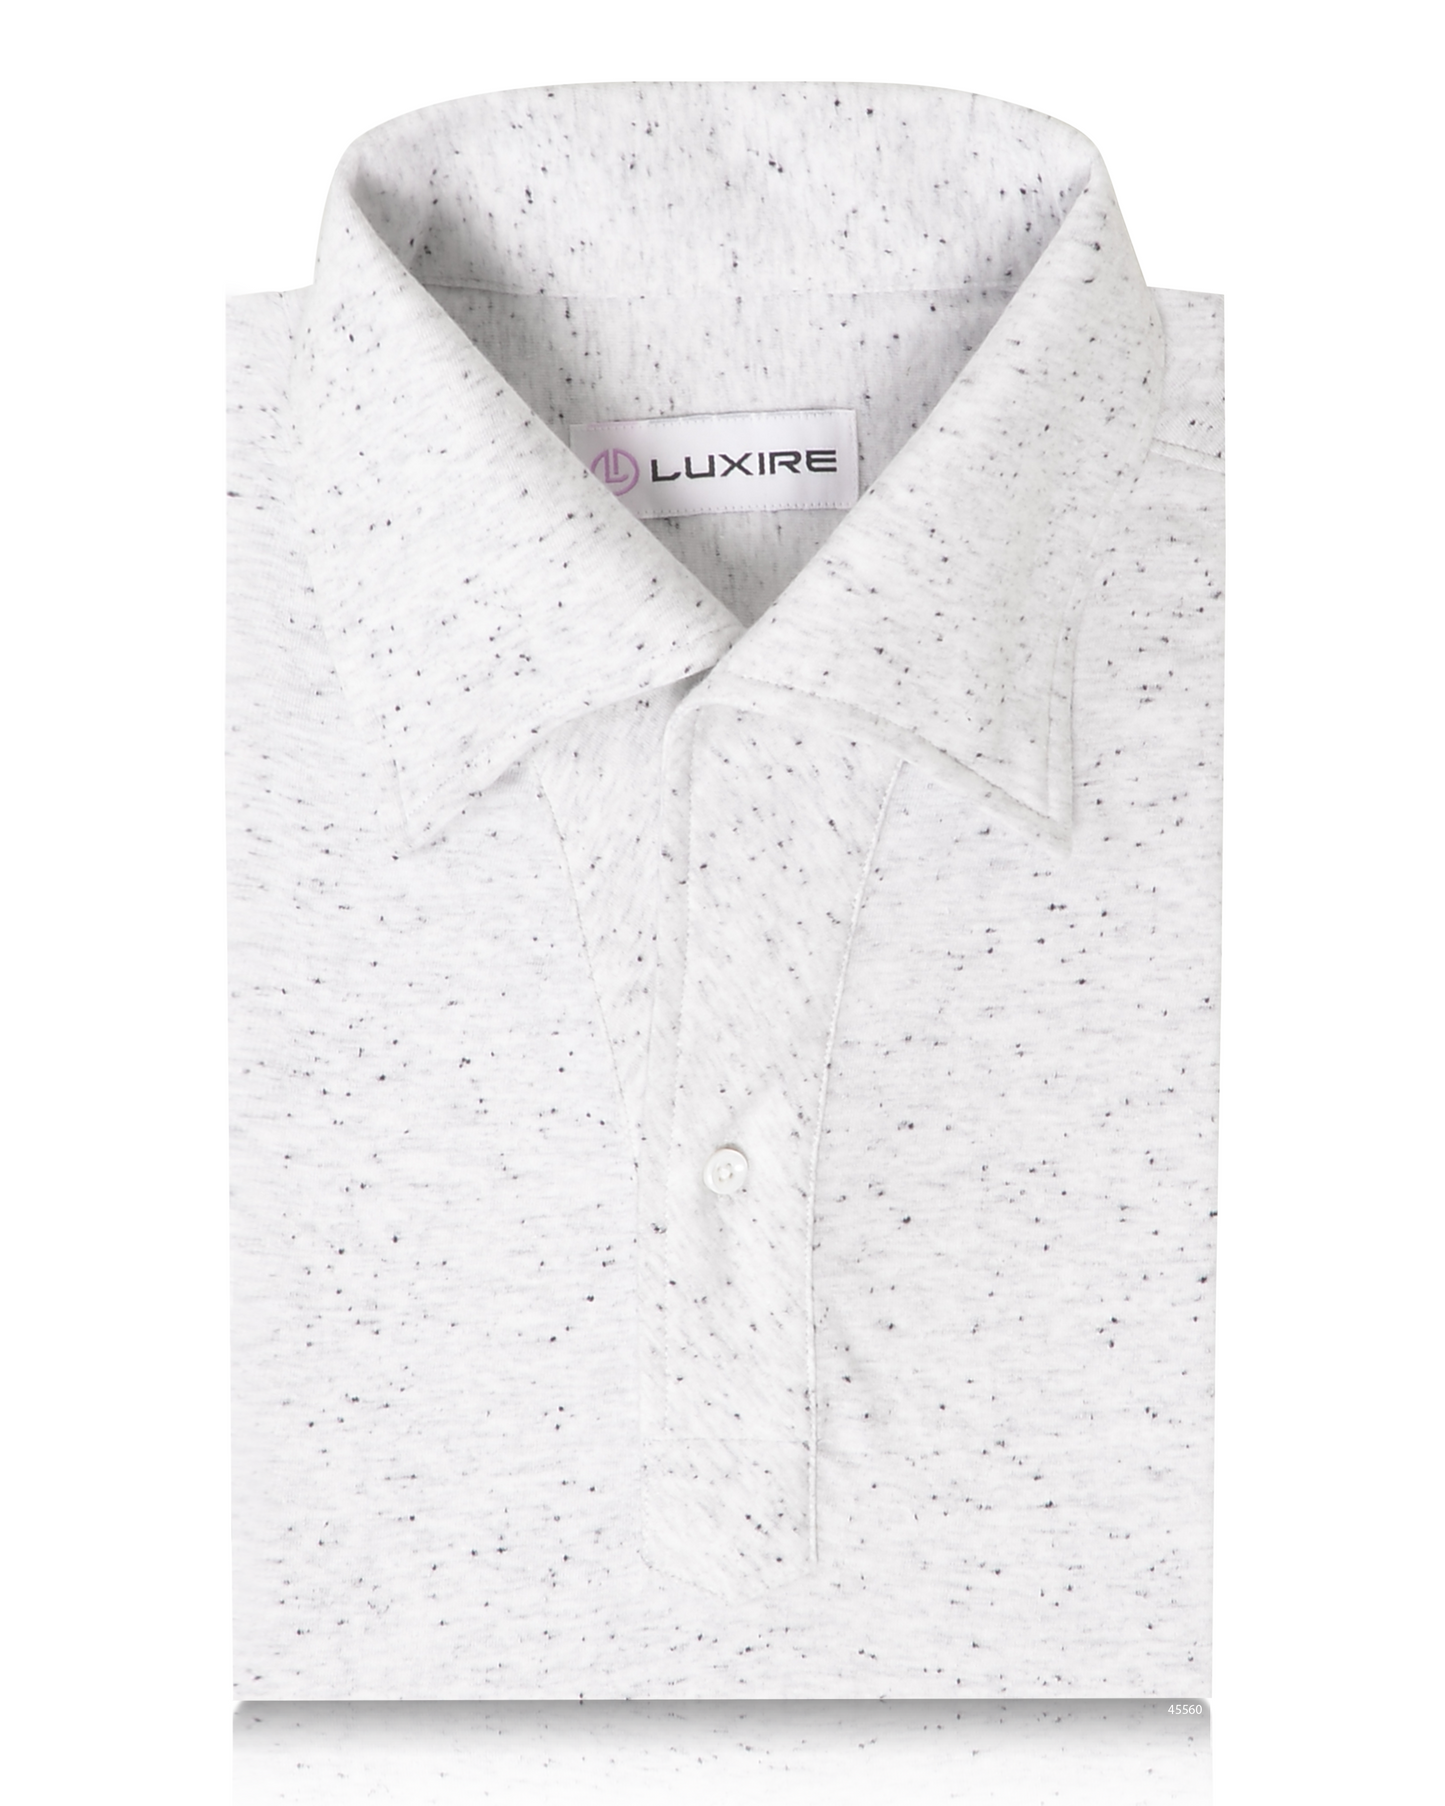 Speckled White Grey Polo T-Shirt